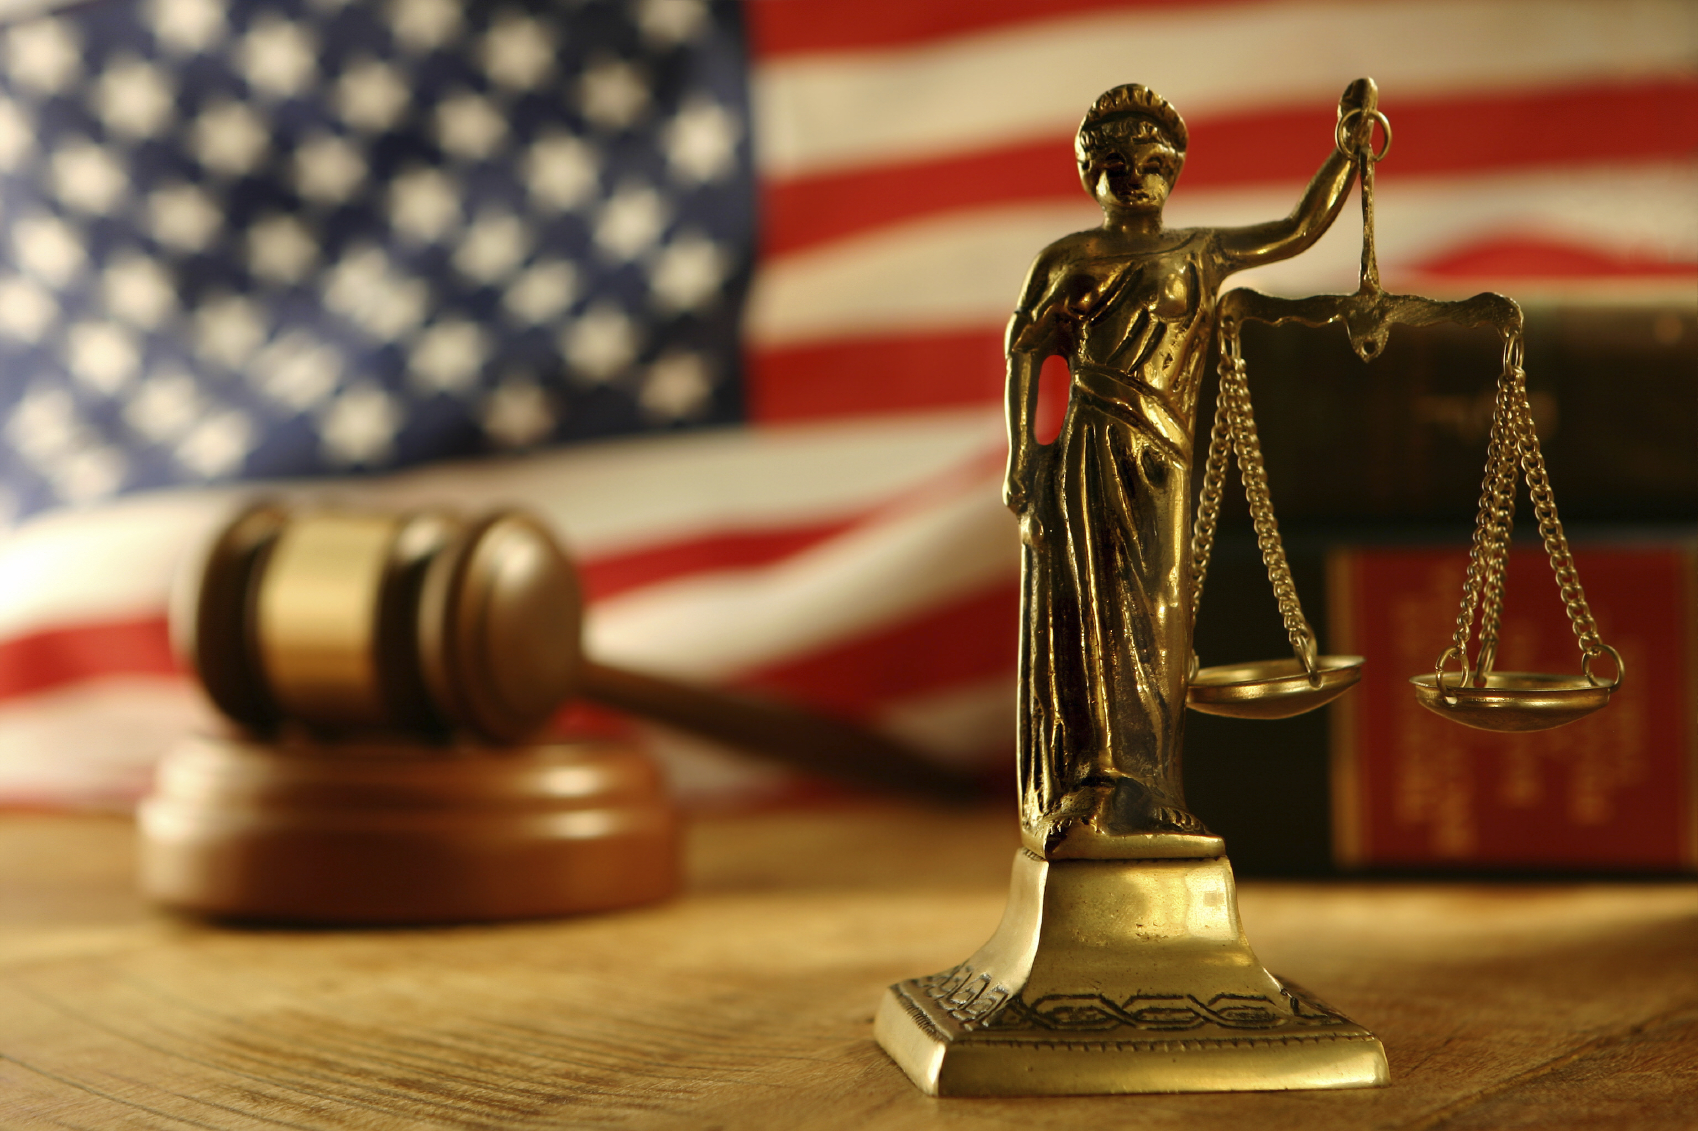 Immigration: Lady scales of Justice in front of the American flag and a gavel